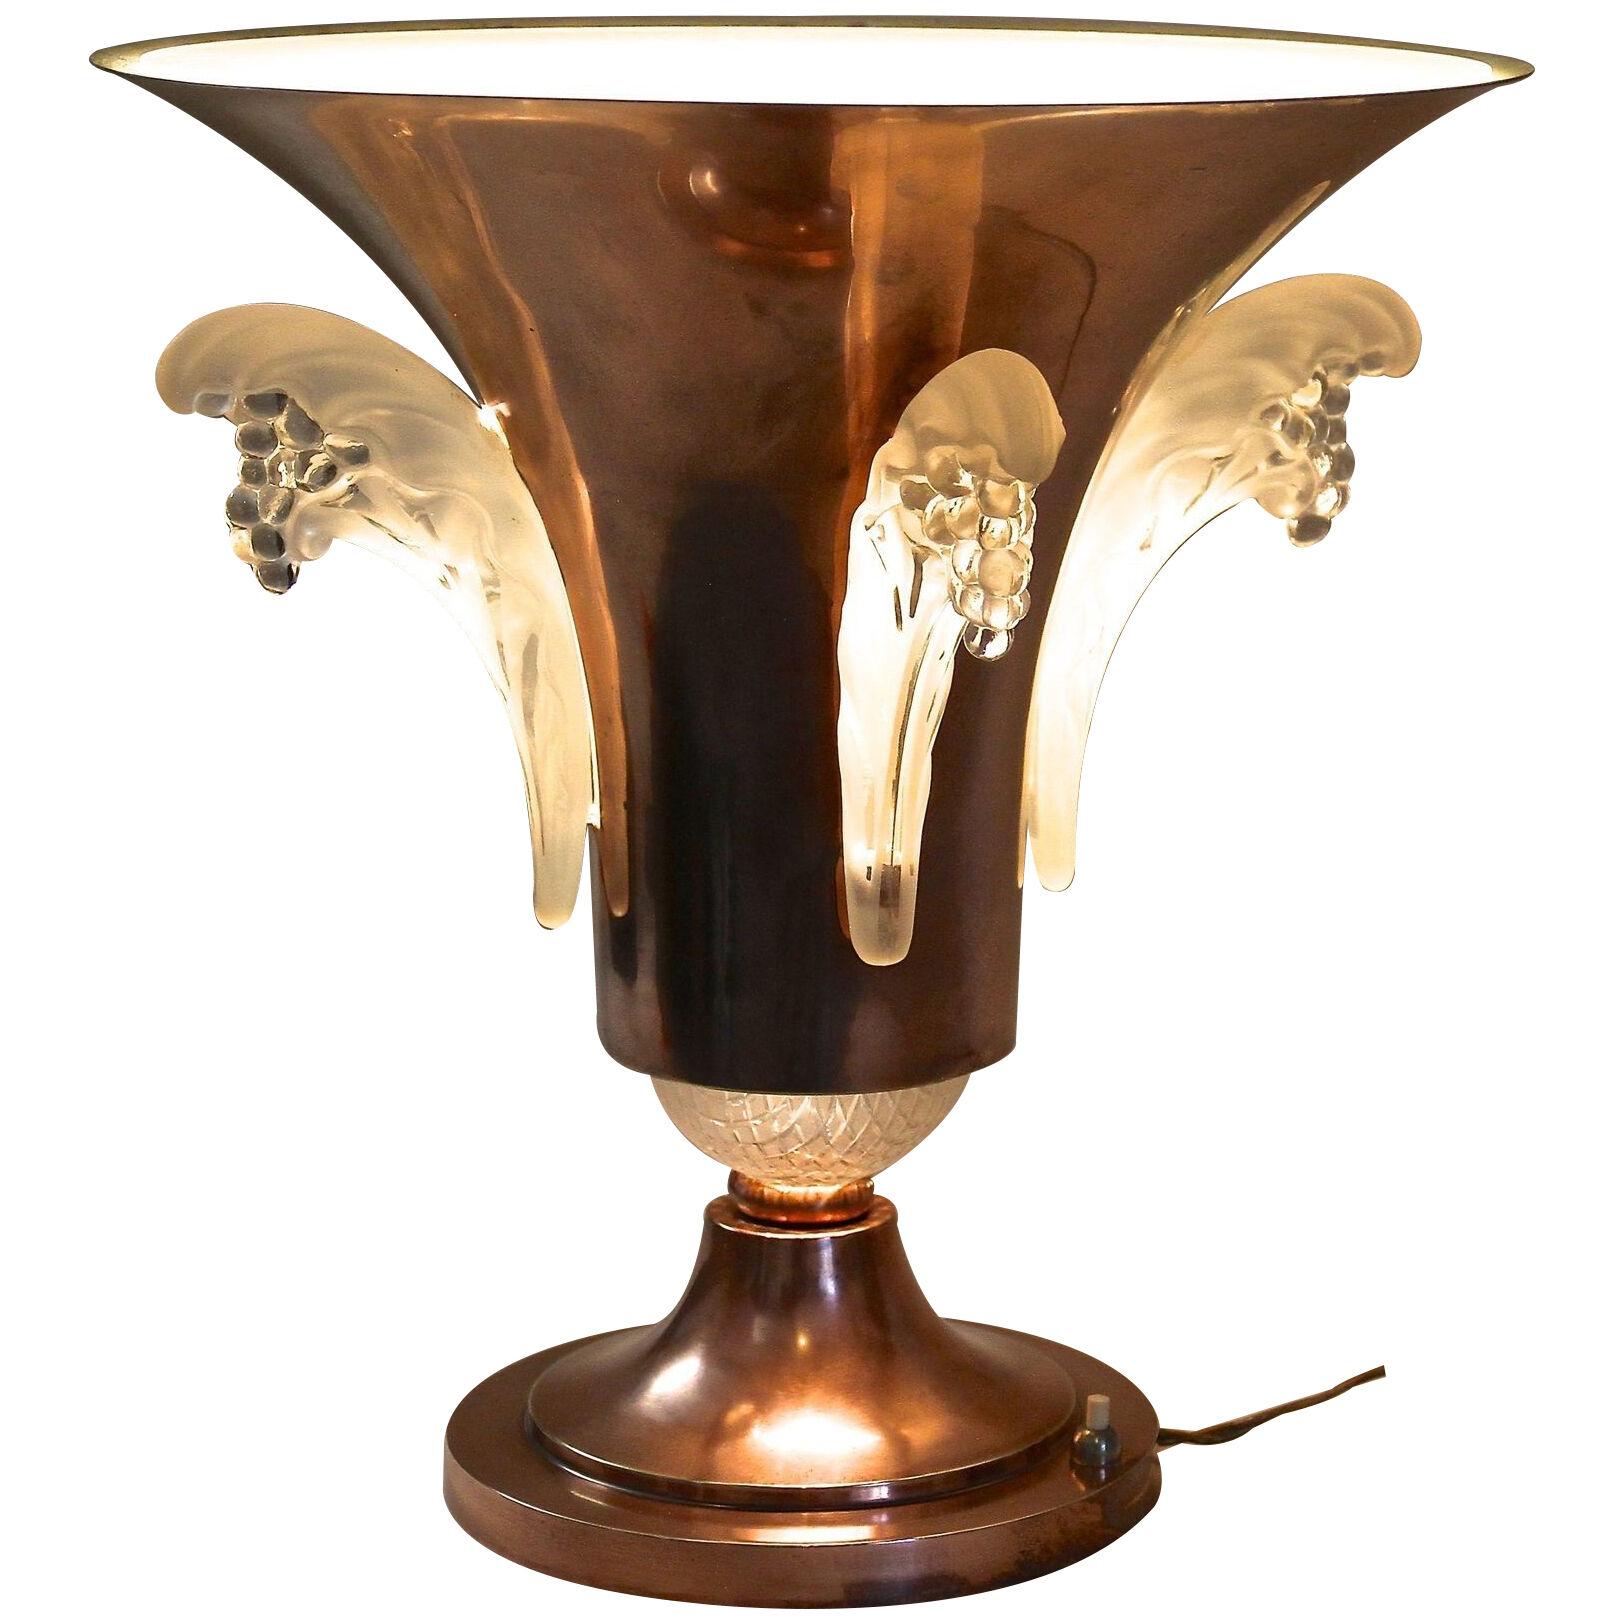 Art Deco Copper Table Lamp With Lalique Glass Elements, France circa 1925